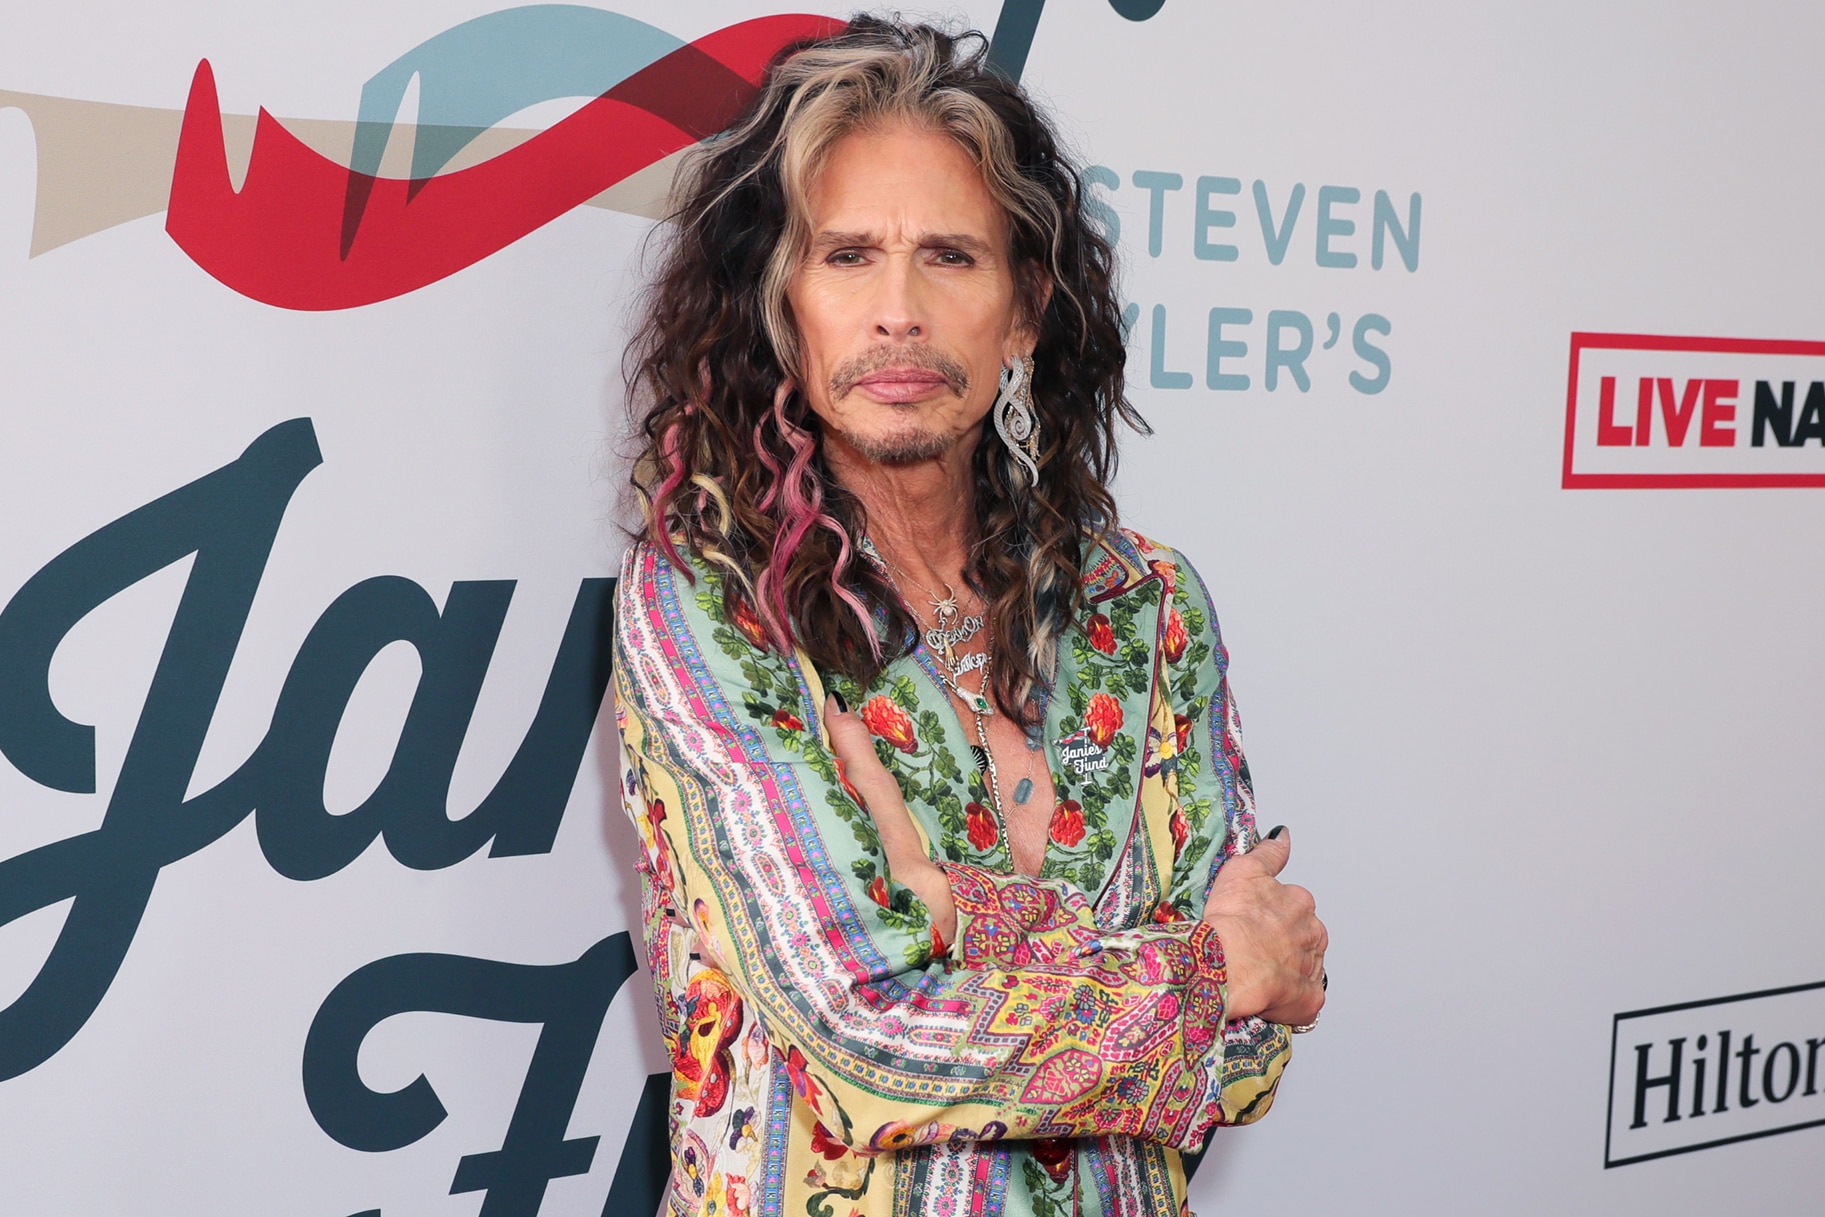 Steven Tyler arrives at Steven Tyler's Third Annual Grammy Awards Viewing Party